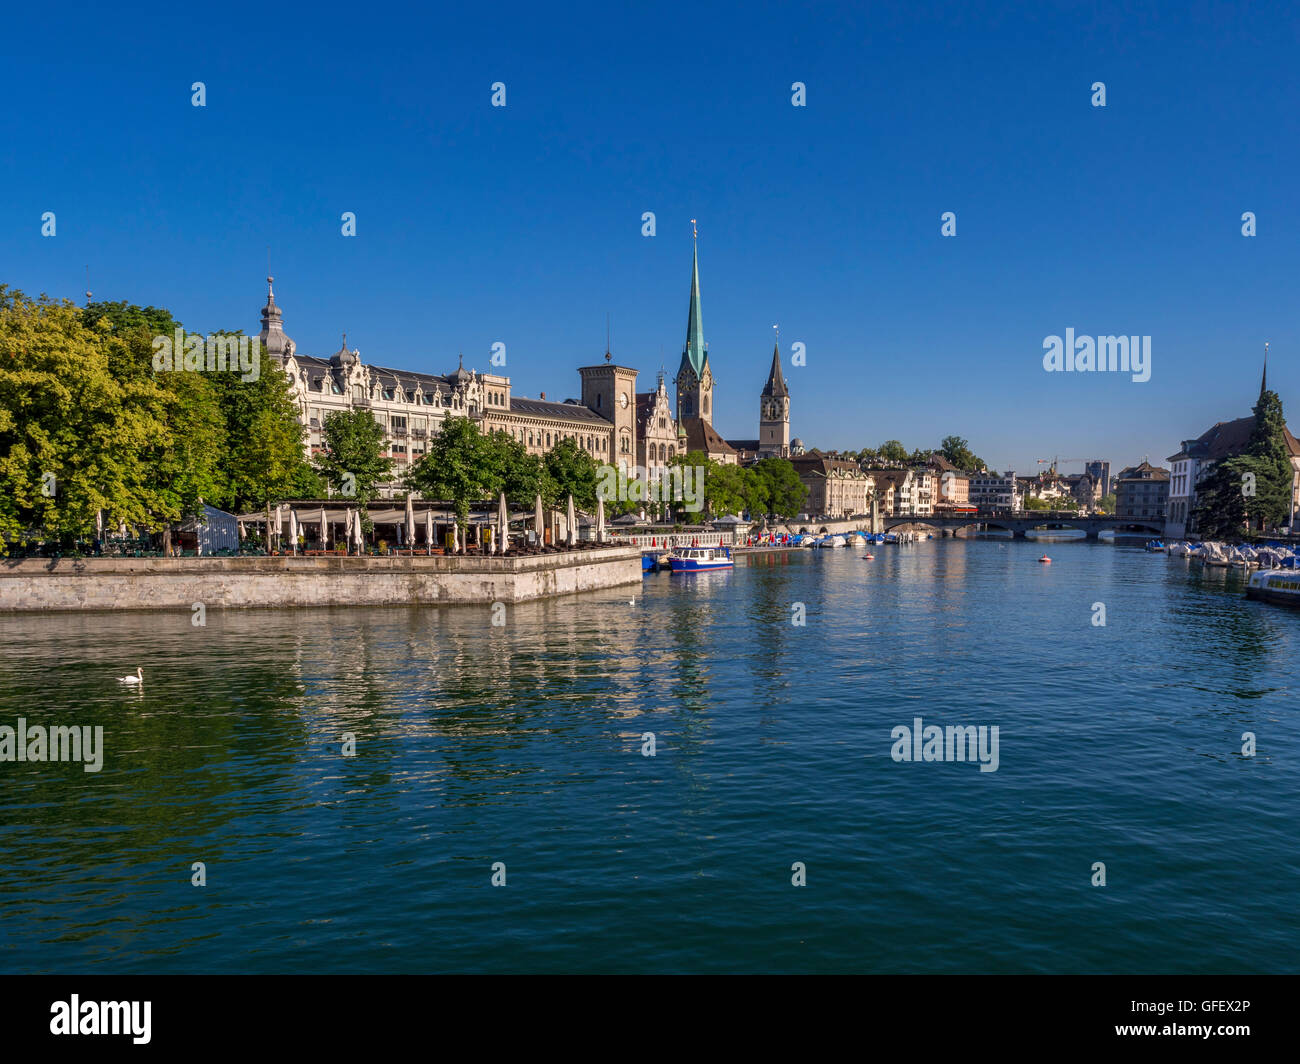 View of Zurich, Limmat river and the churches Frauenmunster, and St. Peter, Switzerland, Europe Stock Photo